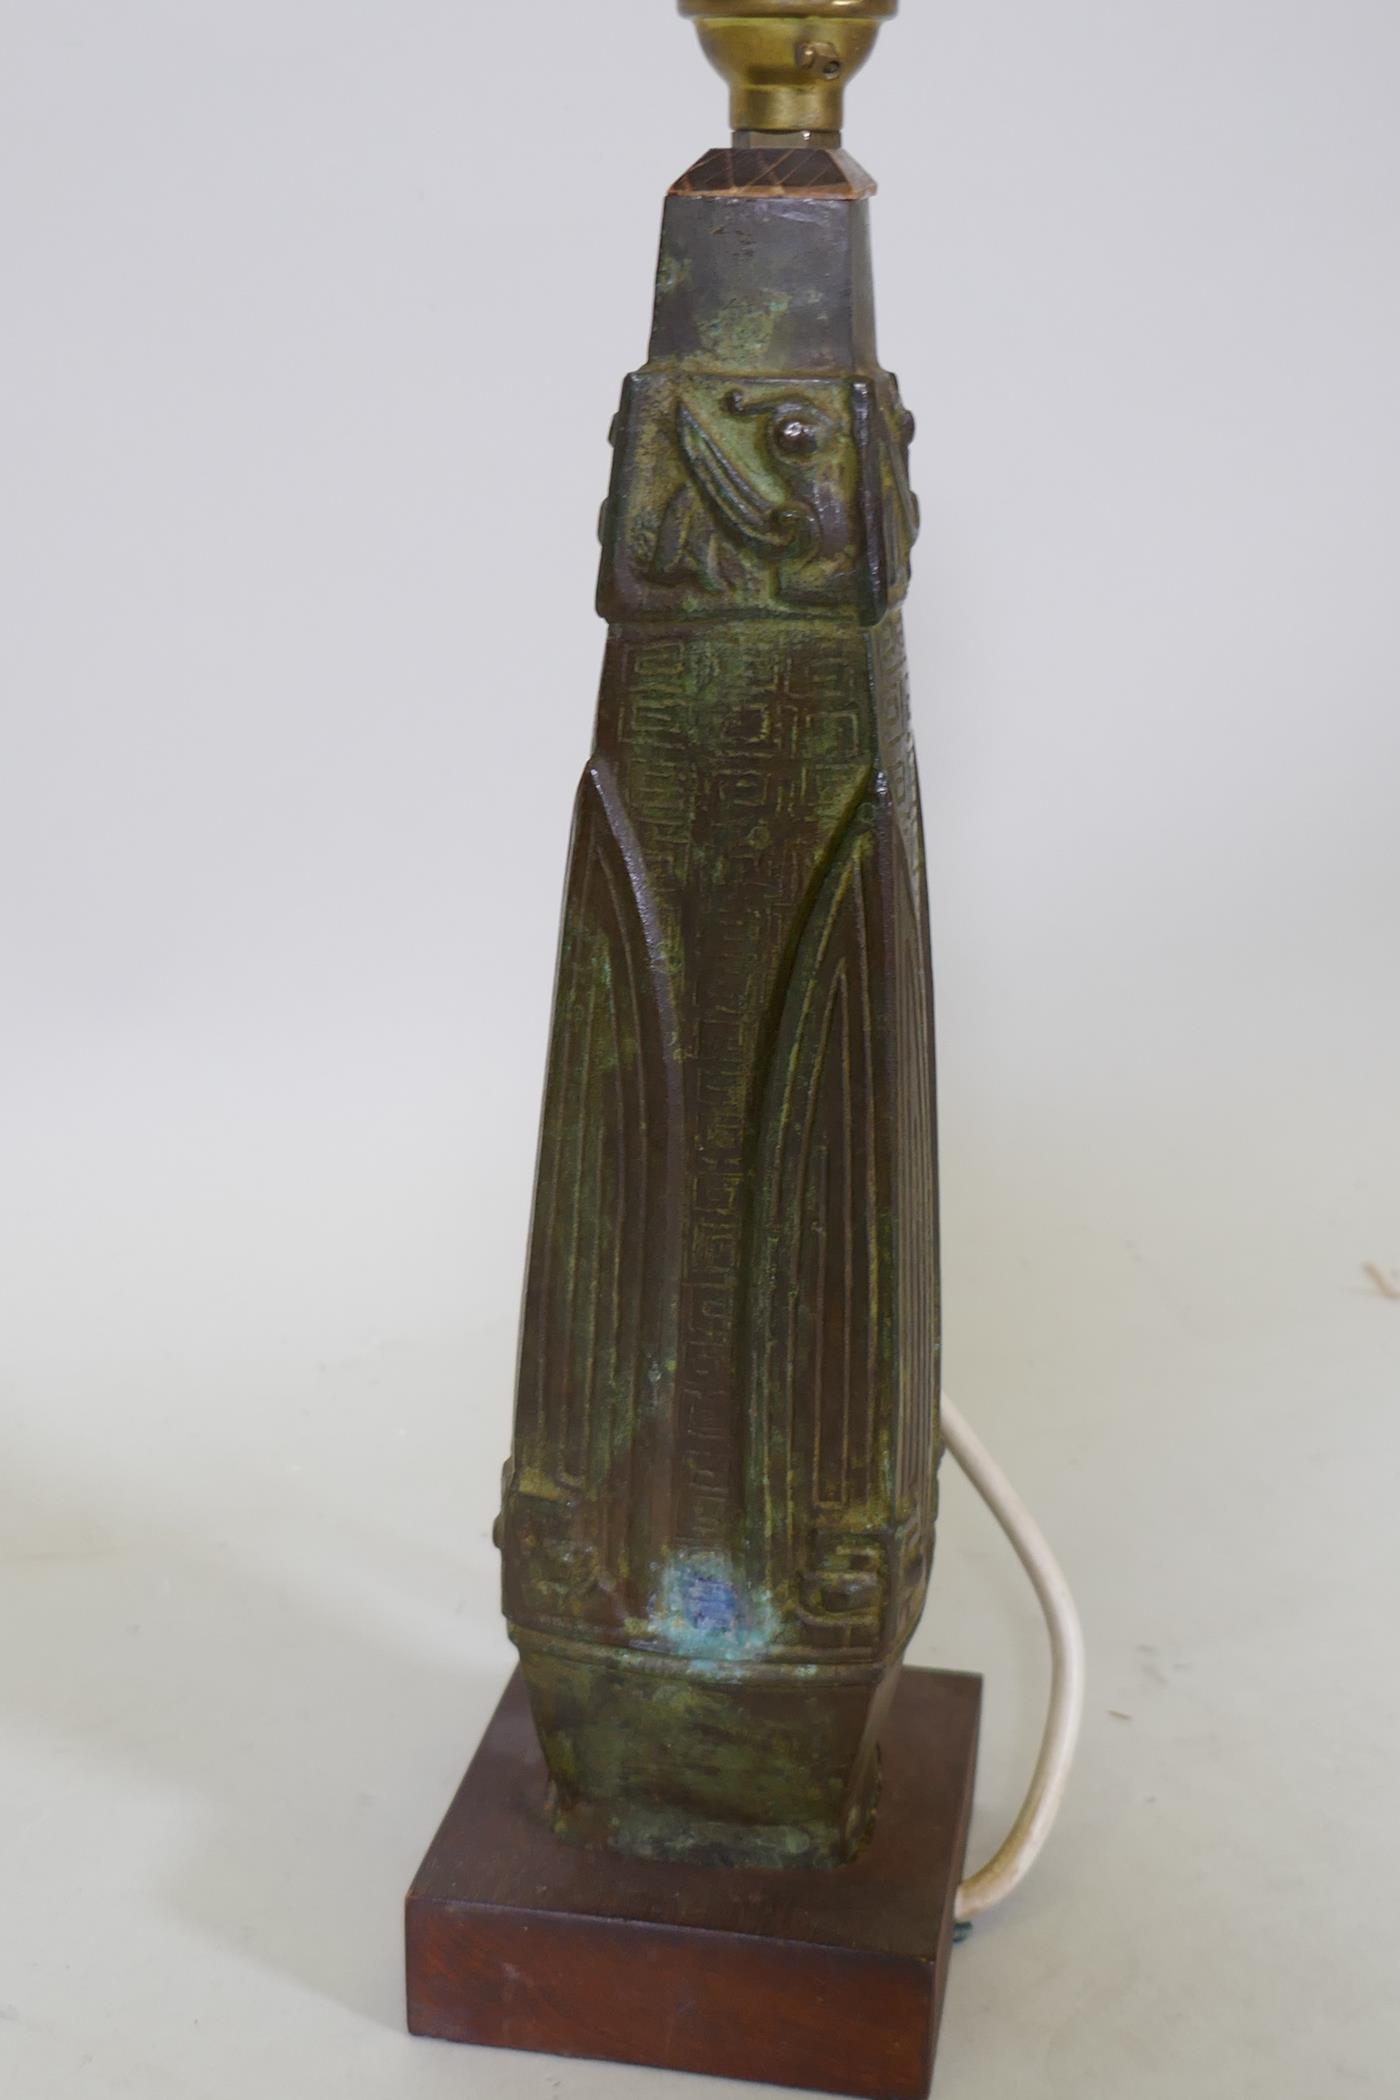 A bronze table lamp with oriental inspired raised decoration, mounted on a wood base, 32cm high - Image 2 of 2